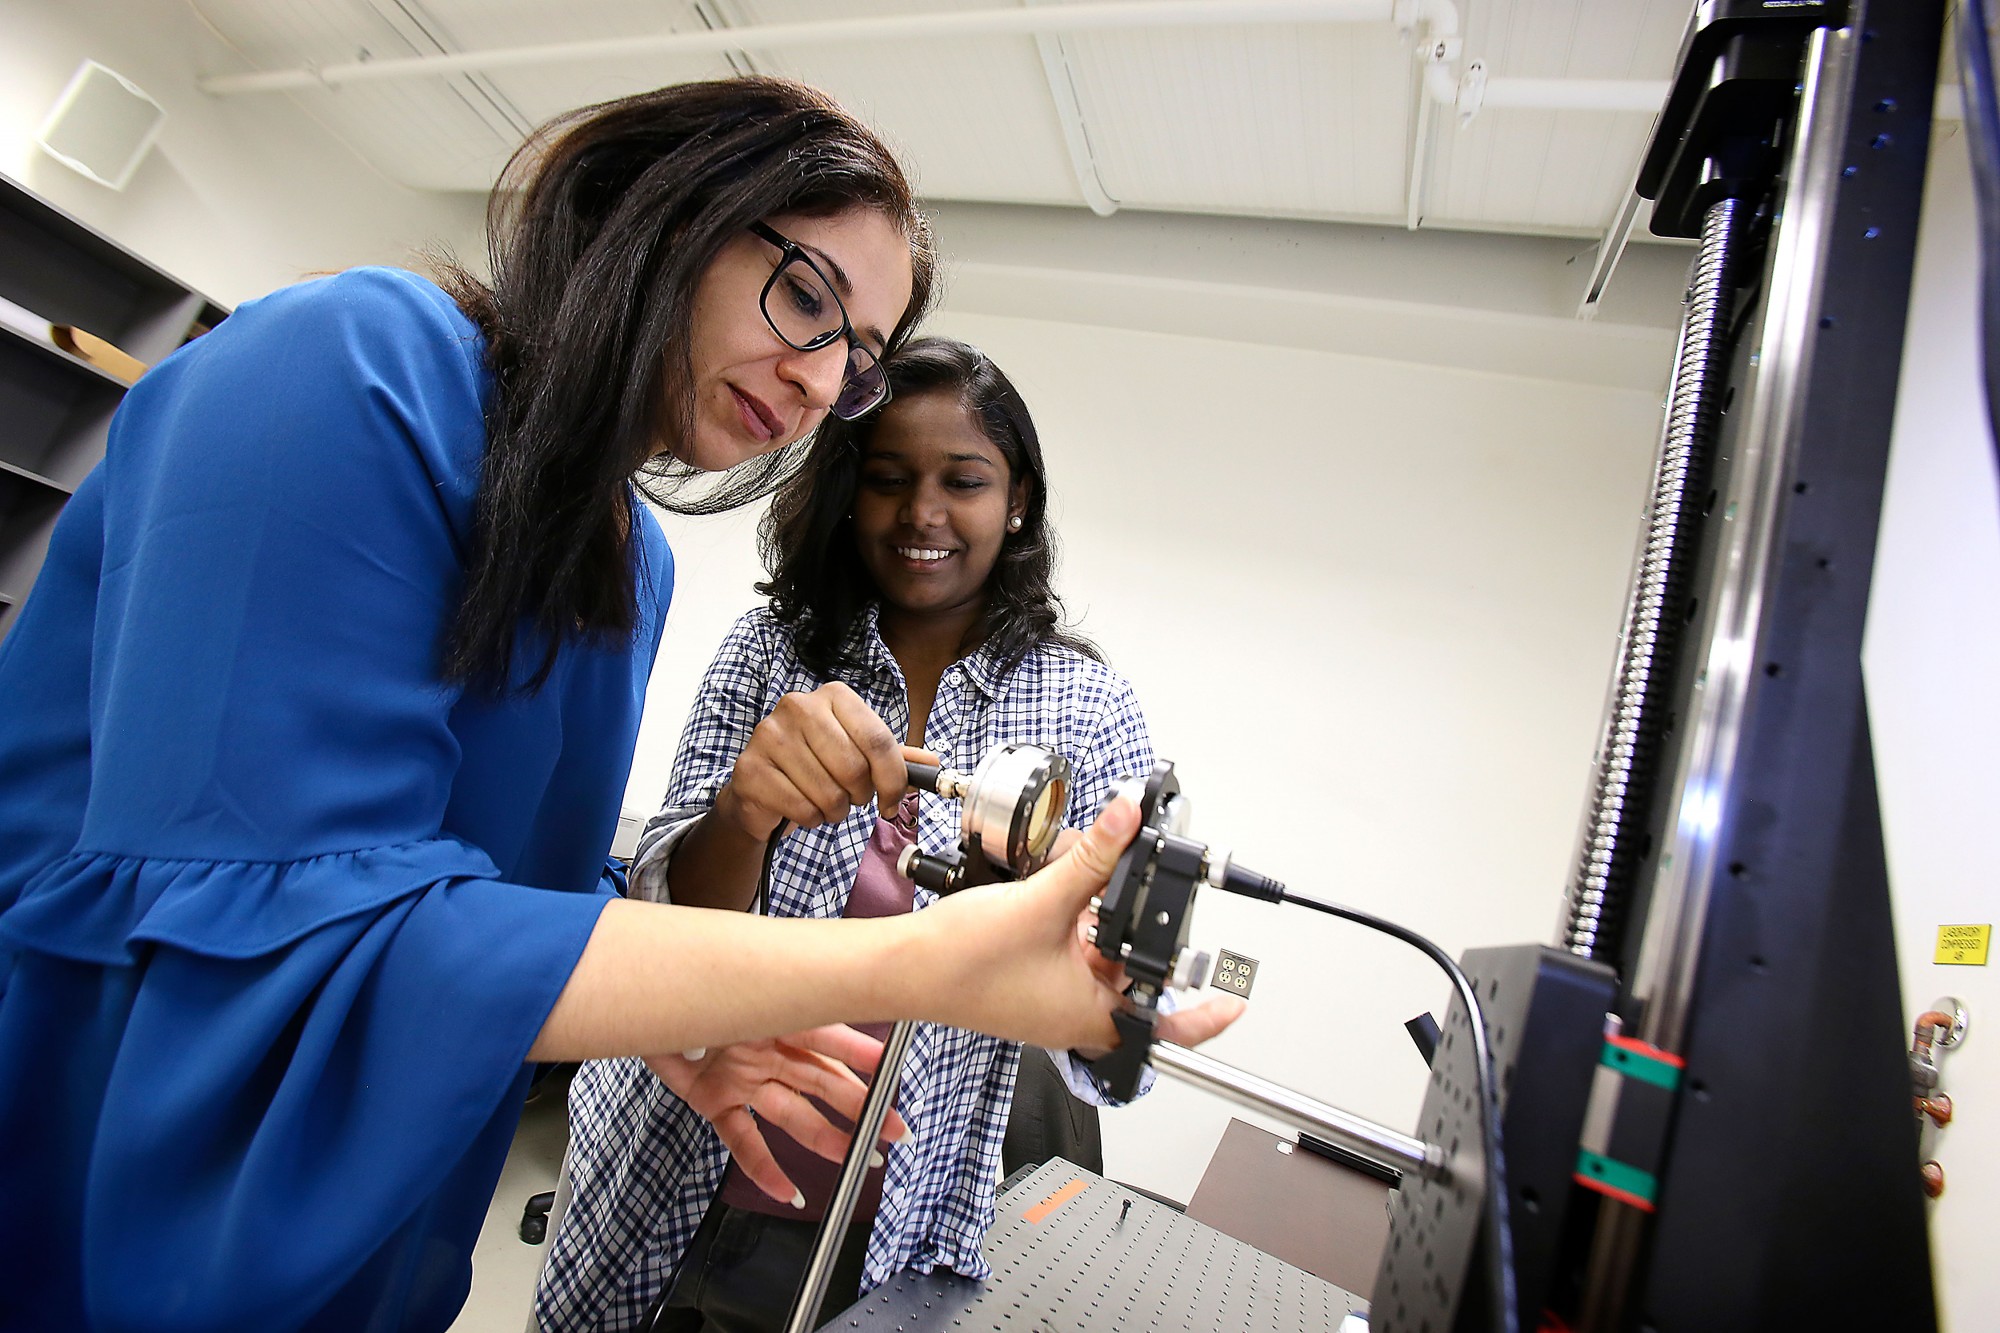 Dr. Arezoo Emadi and Jenitha Balasingam working in Electrical Micro & Nano Devices and Sensors.